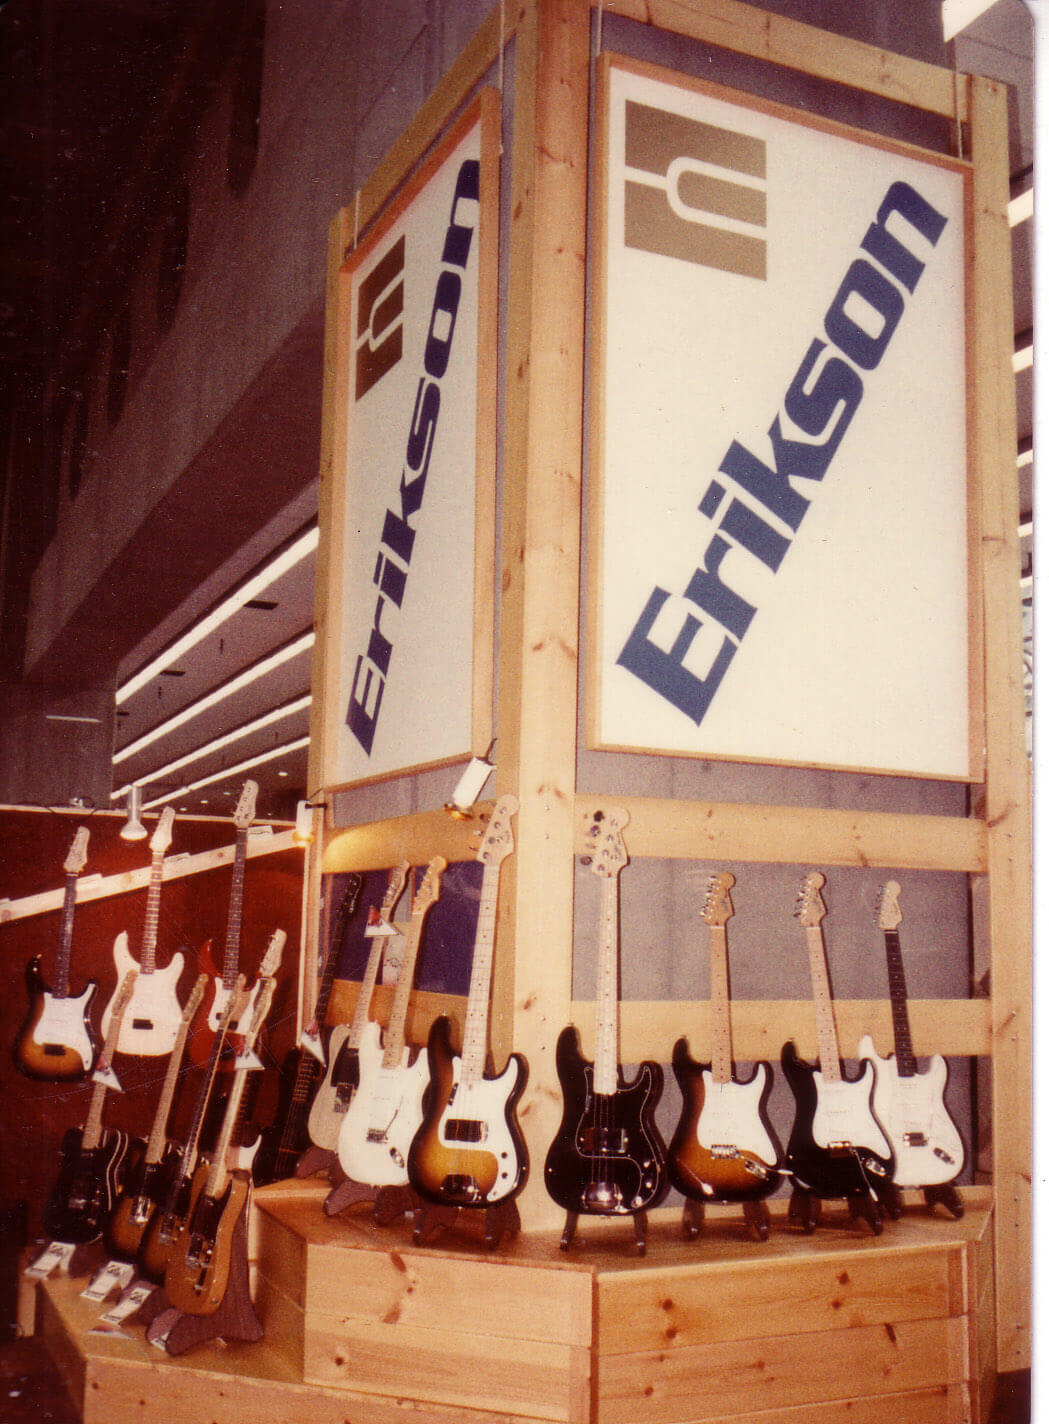 An Erikson Music display from the 1970s.